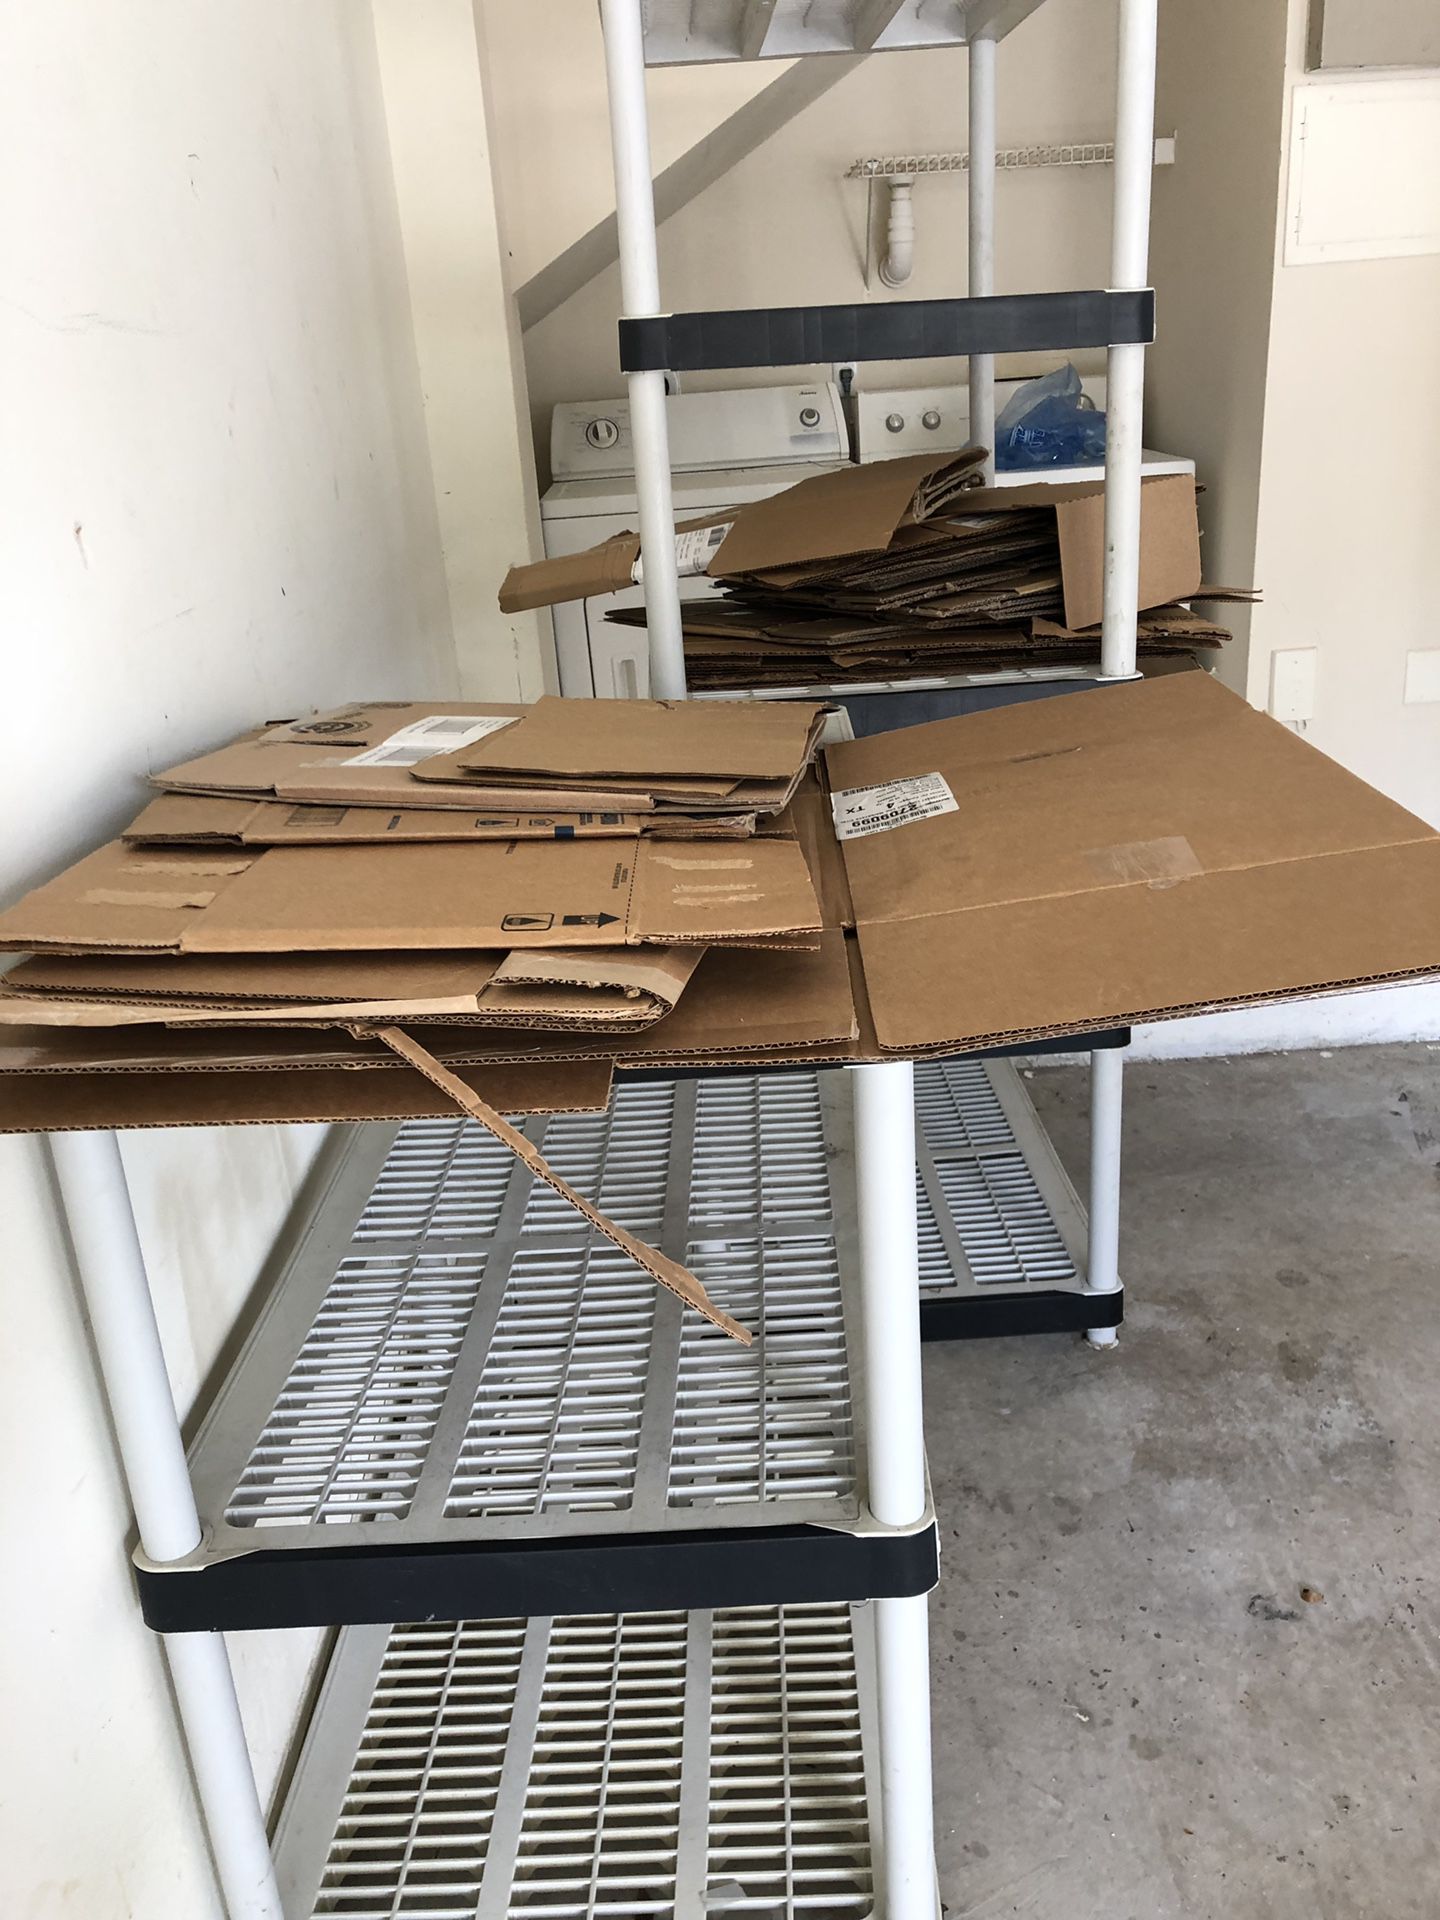 Free moving boxes!